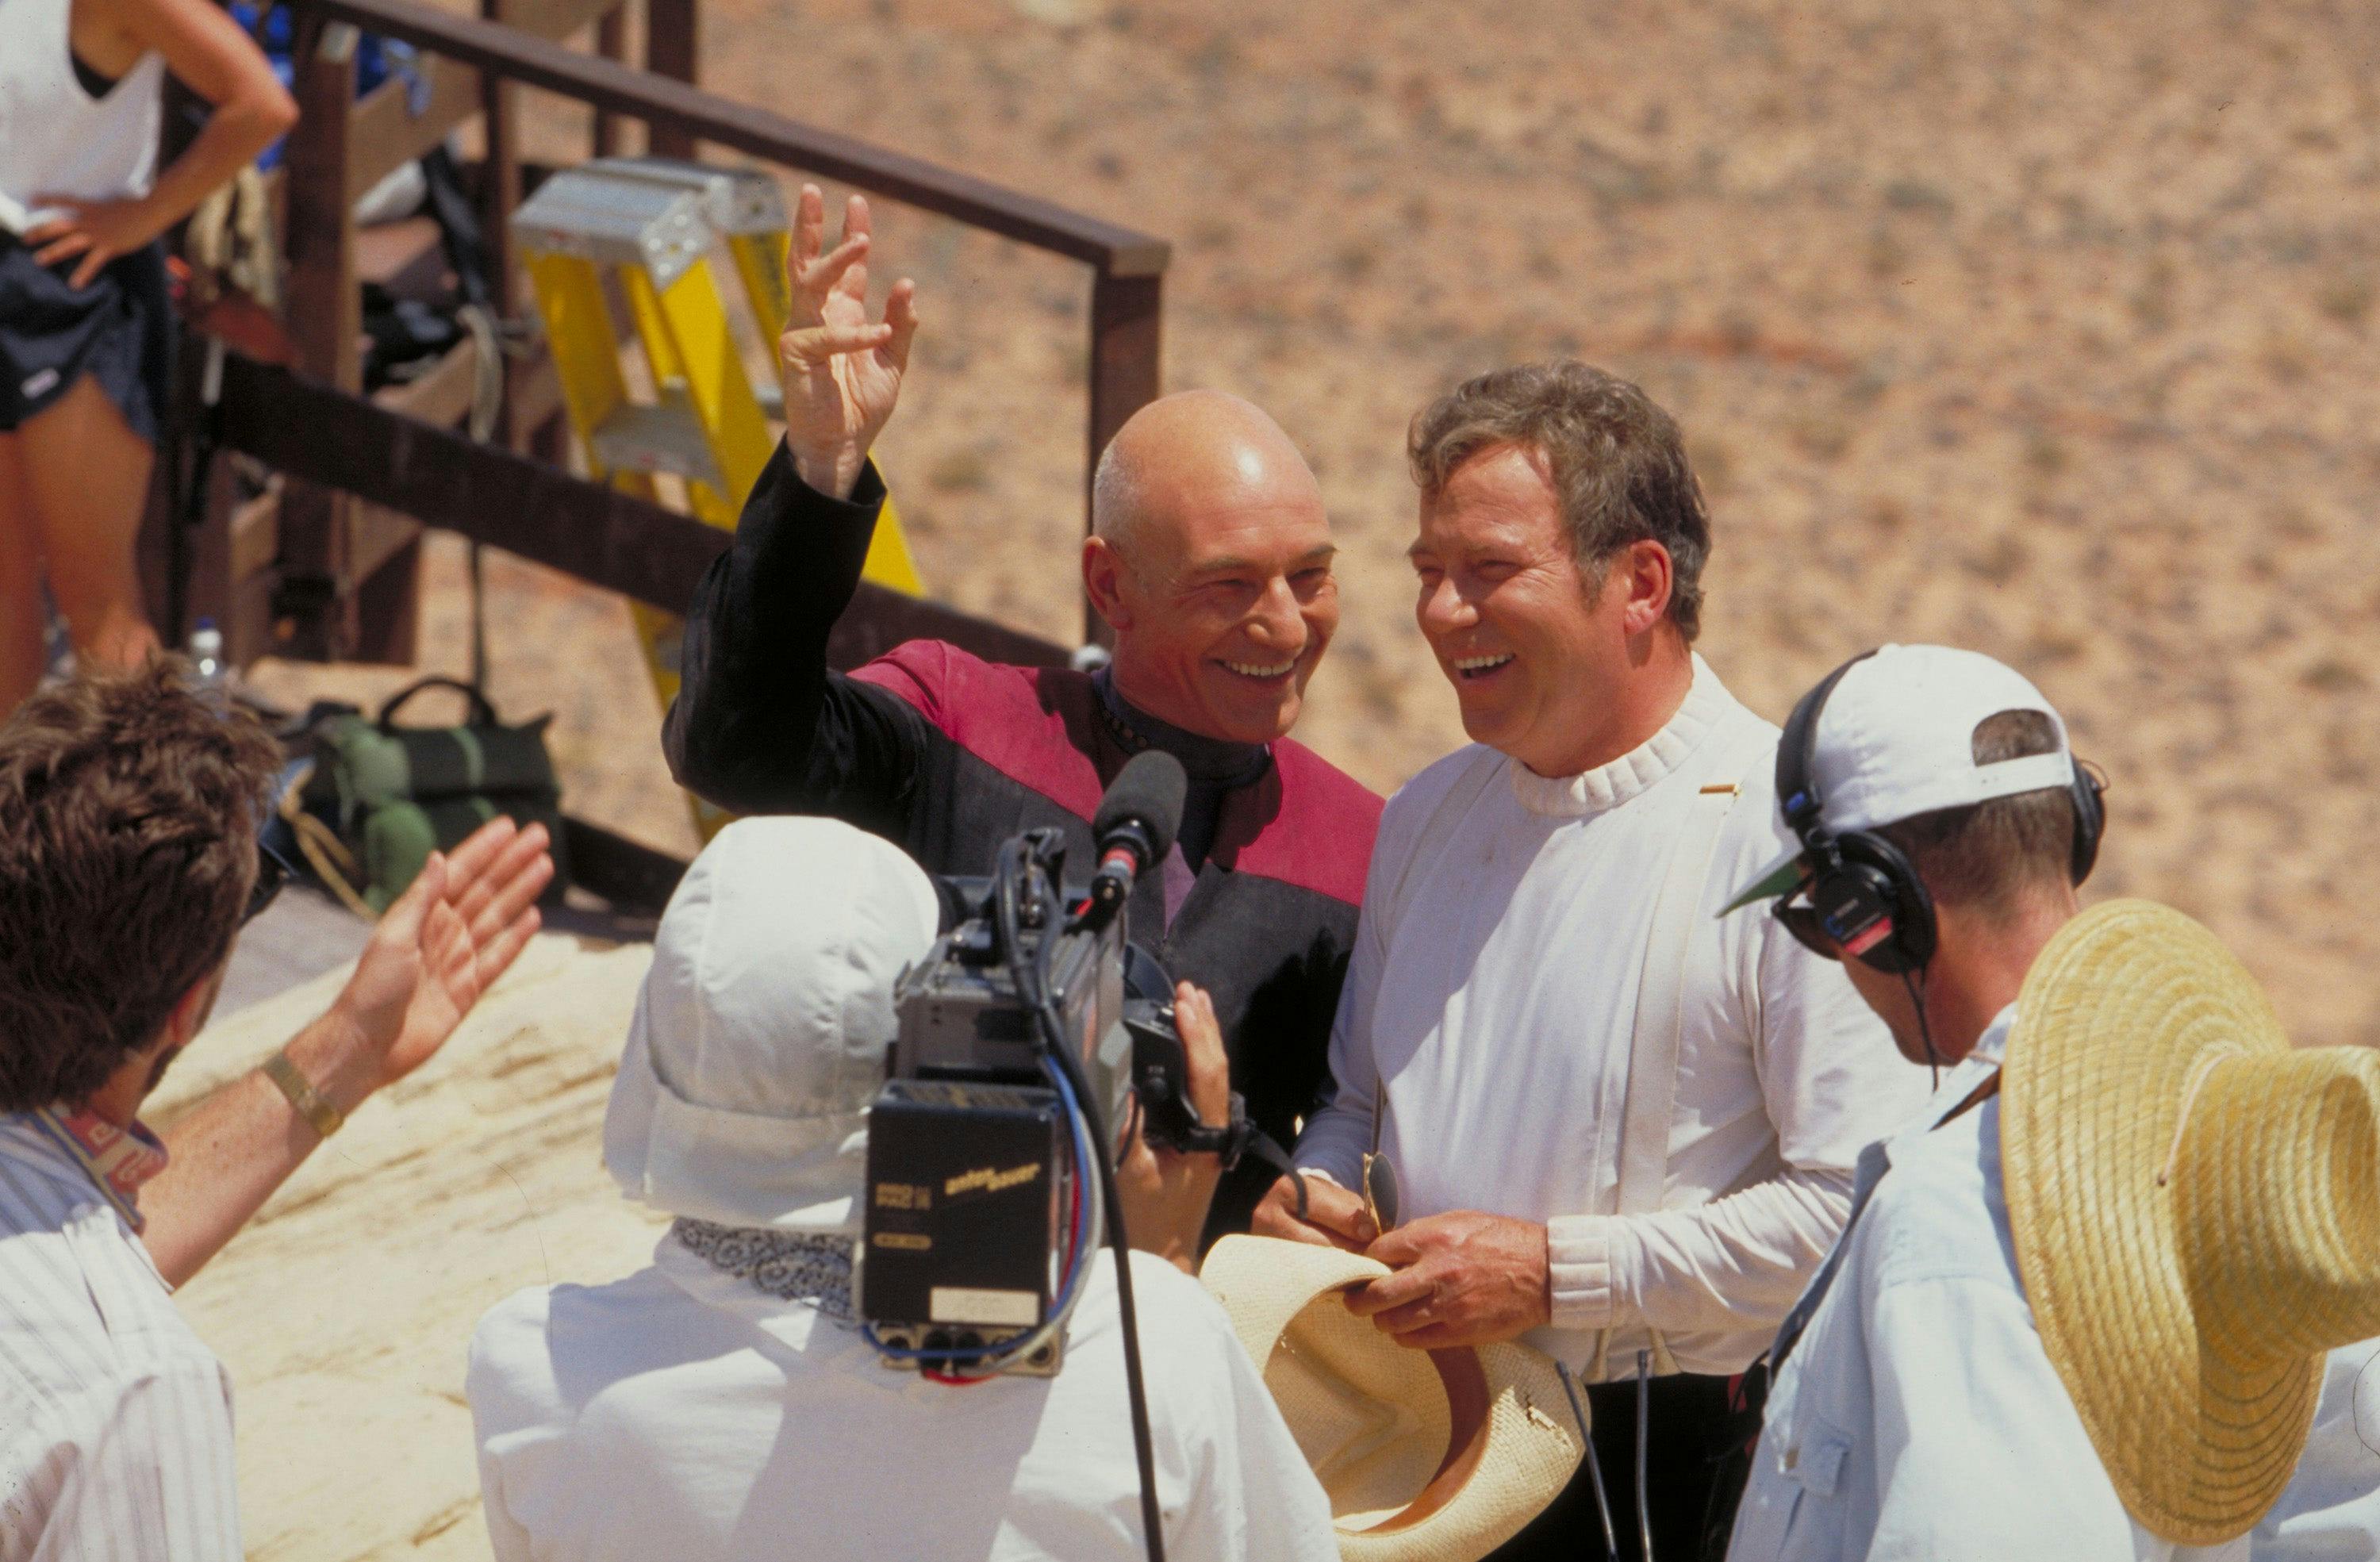 Patrick Stewart and William Shatner smiling on set of Star Trek Generations as camera crew capture the moment